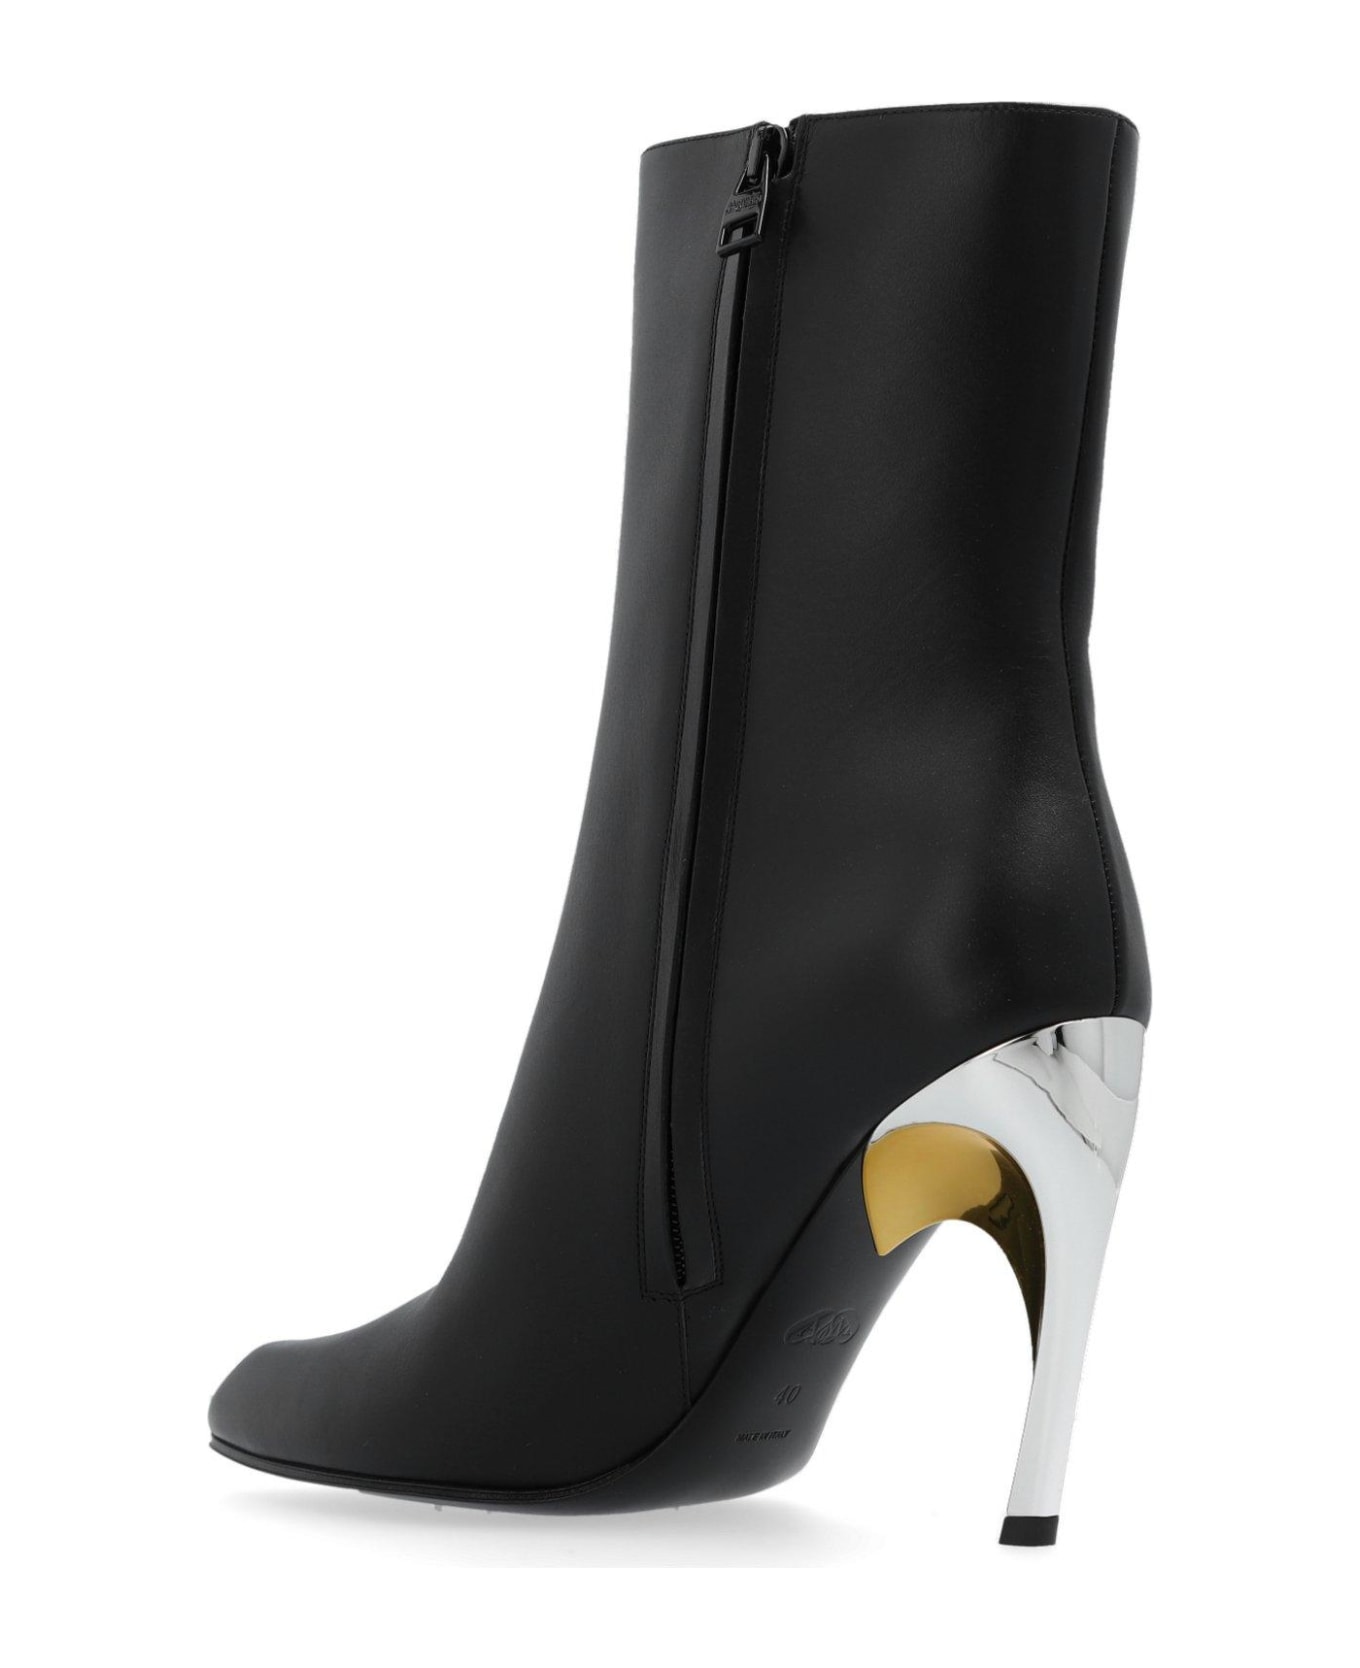 Alexander McQueen Pointed Toe Heeled Boots - Black/silver/gold